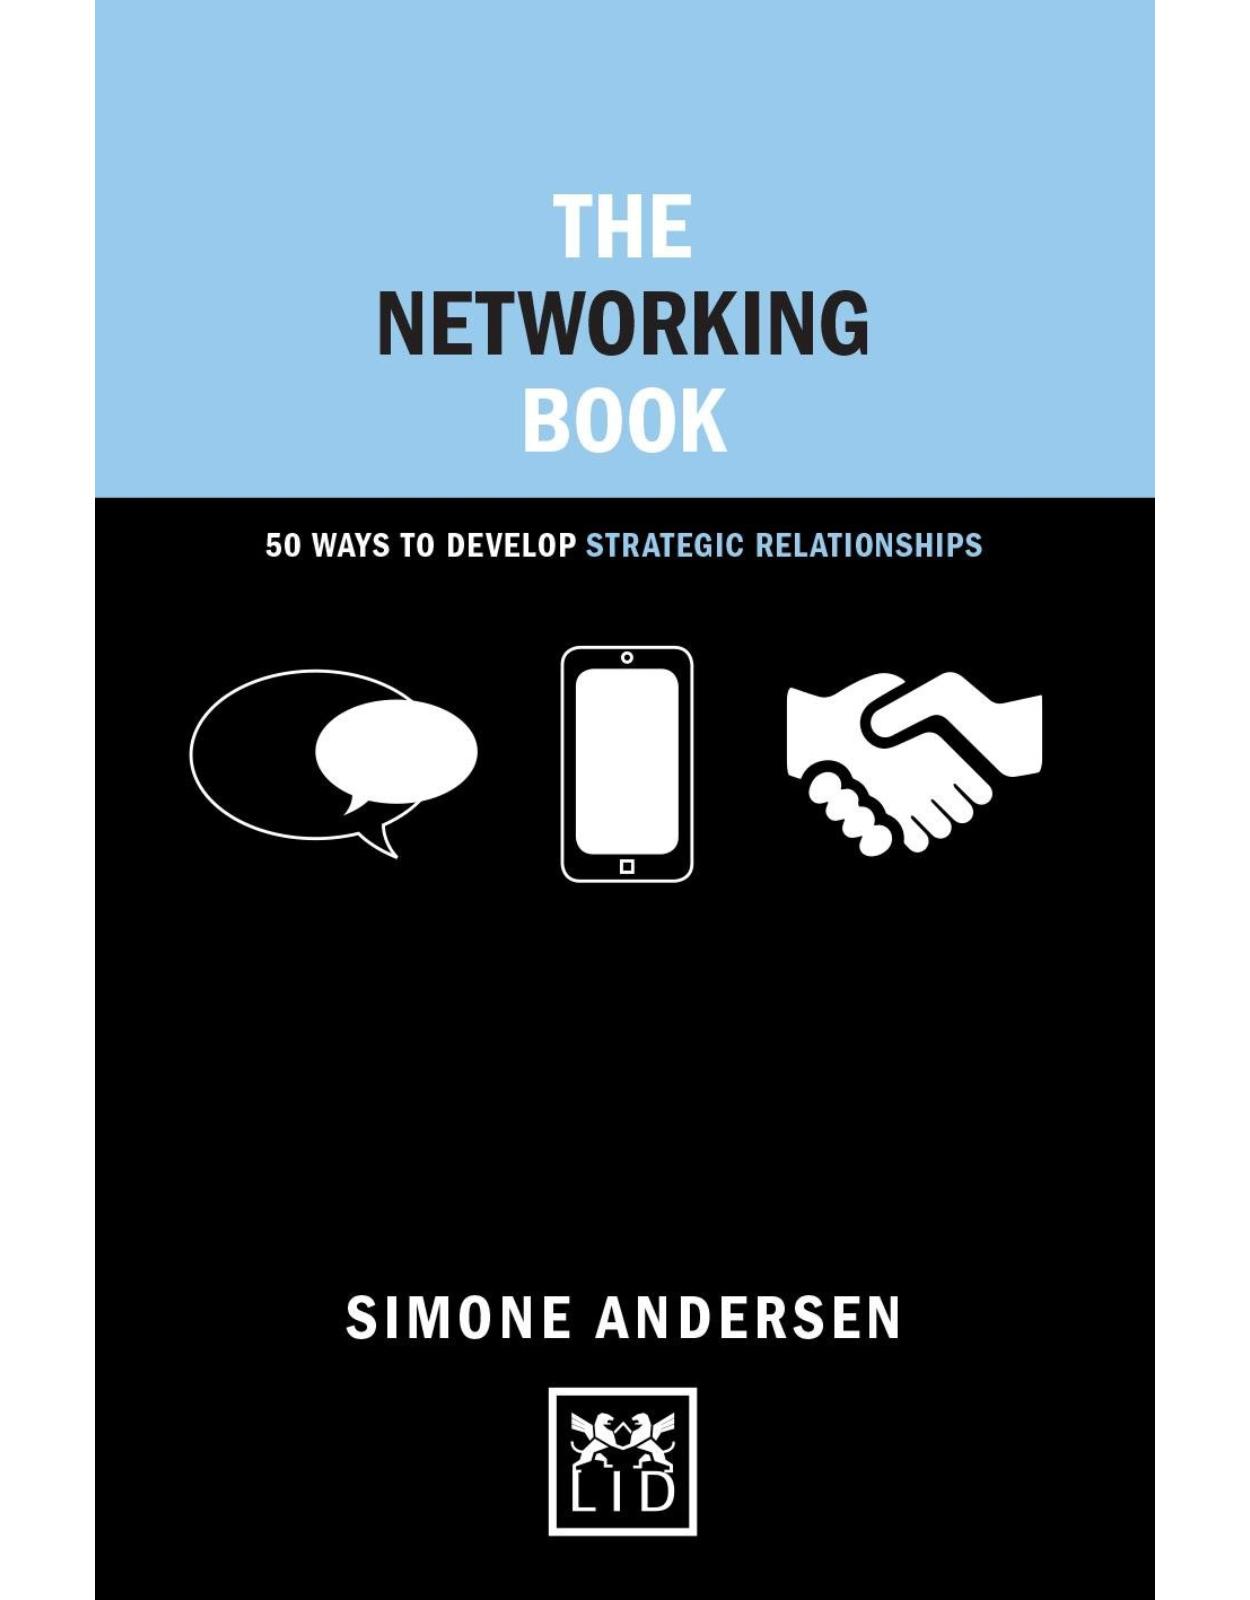 The Networking Book: 50 Ways to Develop Strategic Relationships